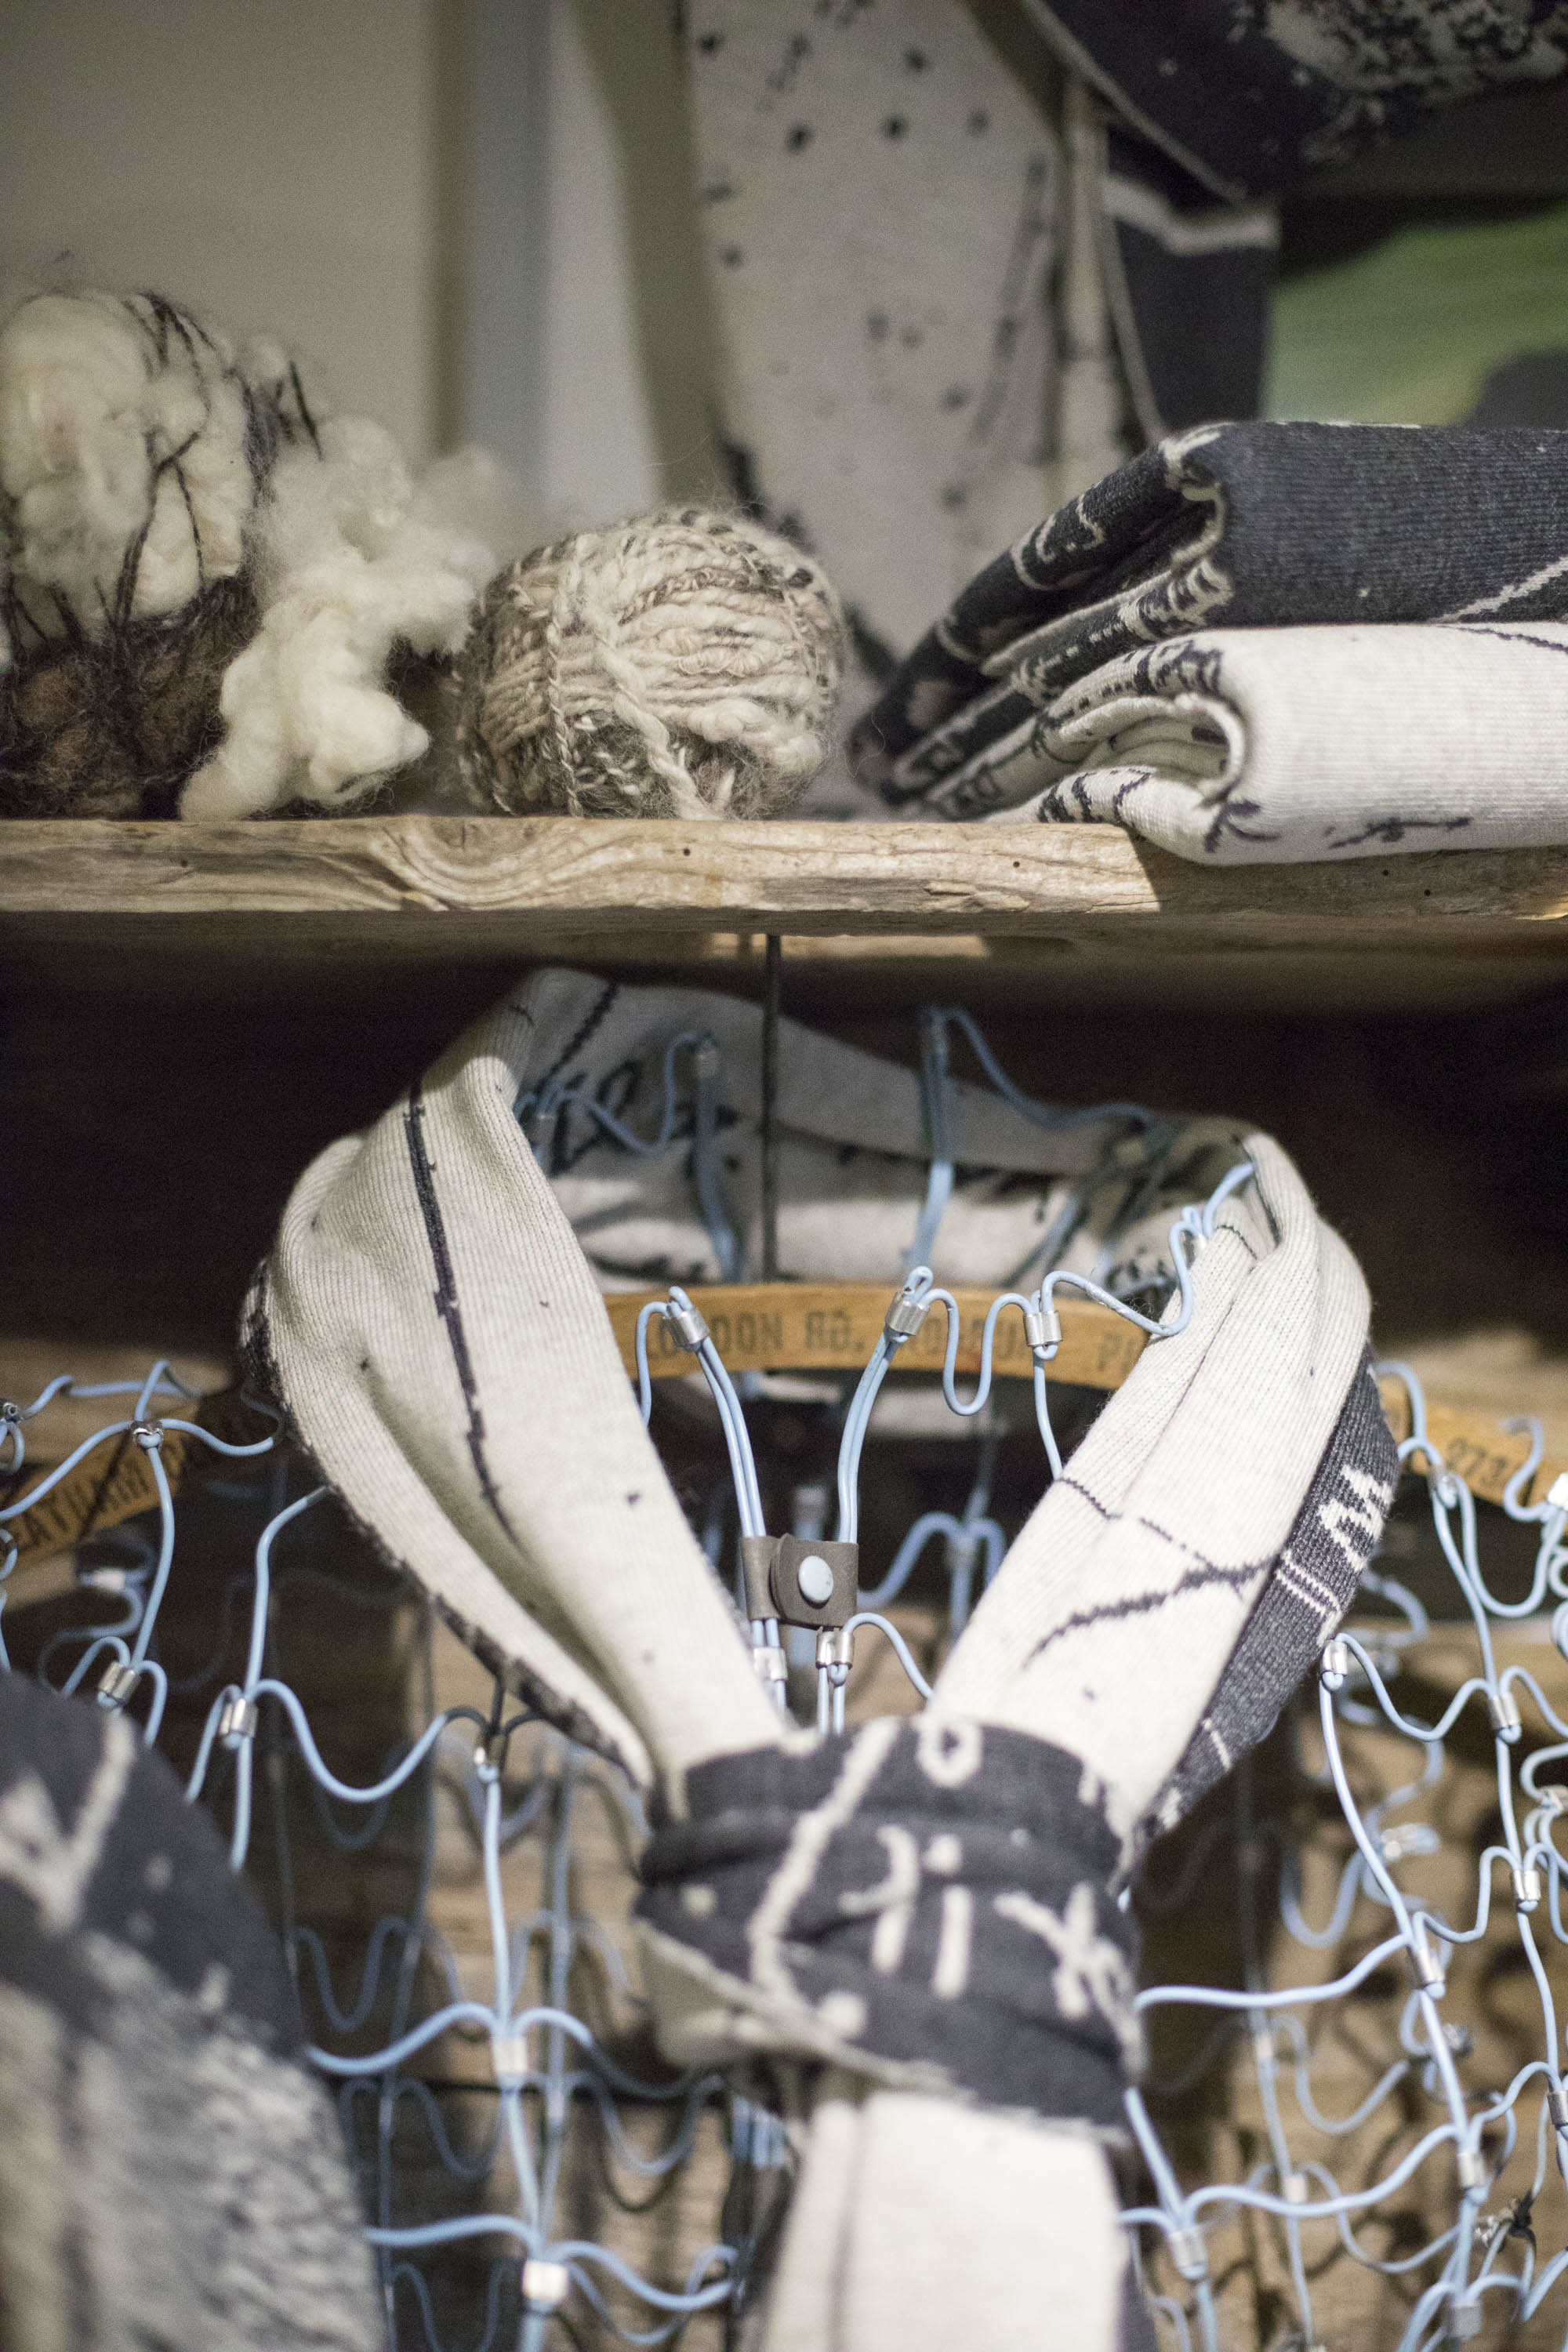 Contemporary knitwear studio in the Shetland Islands, Scotland. Handspun yarn, a charcoal and stone white scarf on a wire frame mannequin, rustic shelving